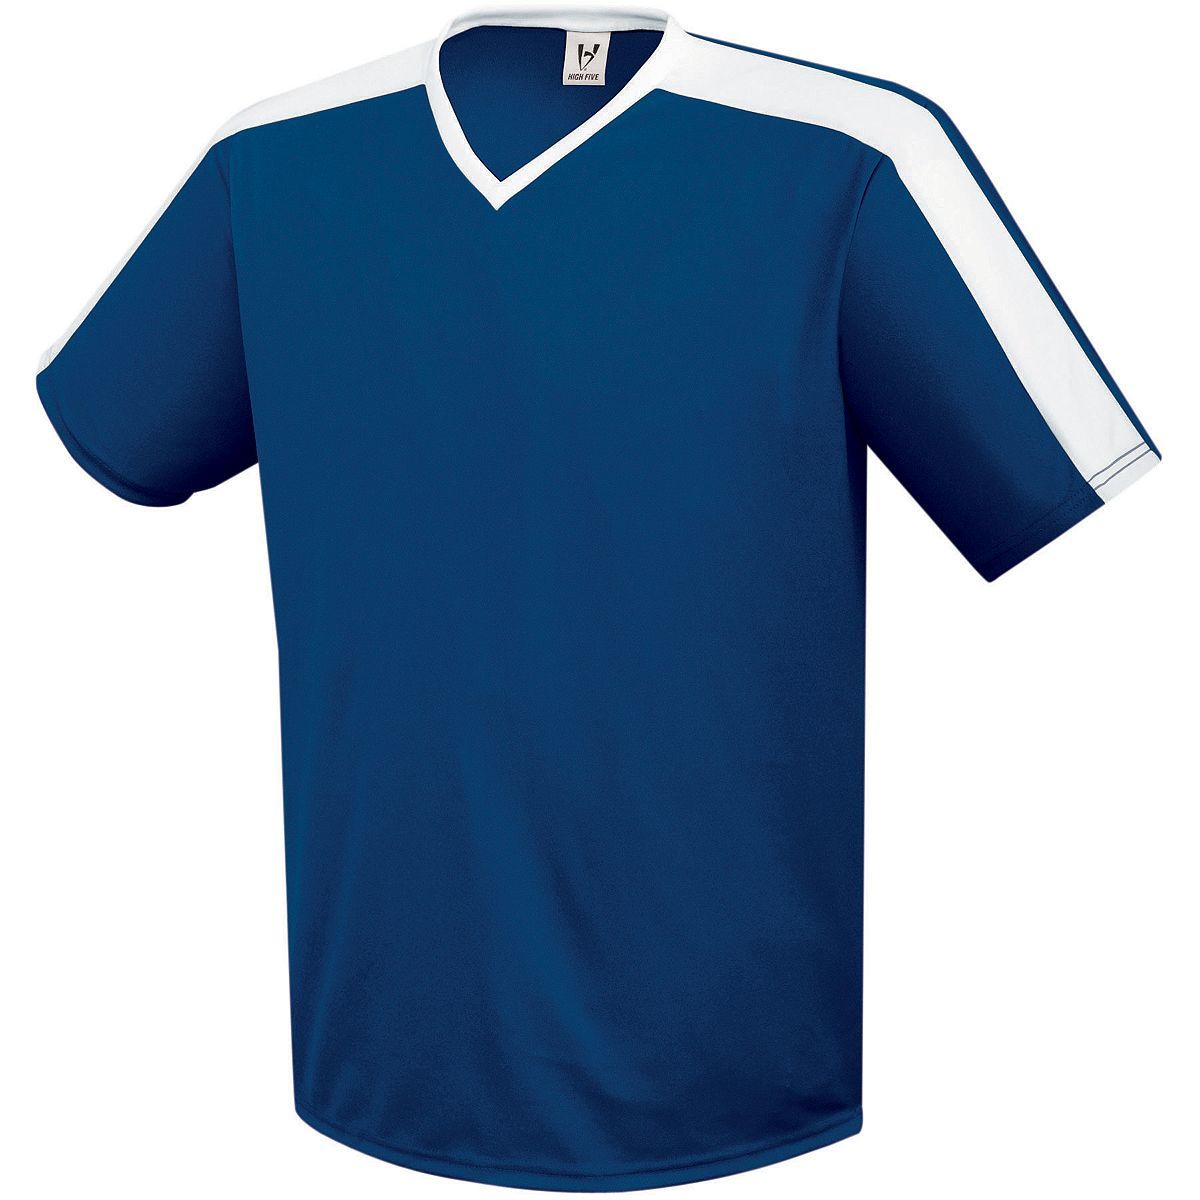 High 5 Genesis Soccer Jersey in Navy/White  -Part of the Adult, Adult-Jersey, High5-Products, Soccer, Shirts, All-Sports-1 product lines at KanaleyCreations.com